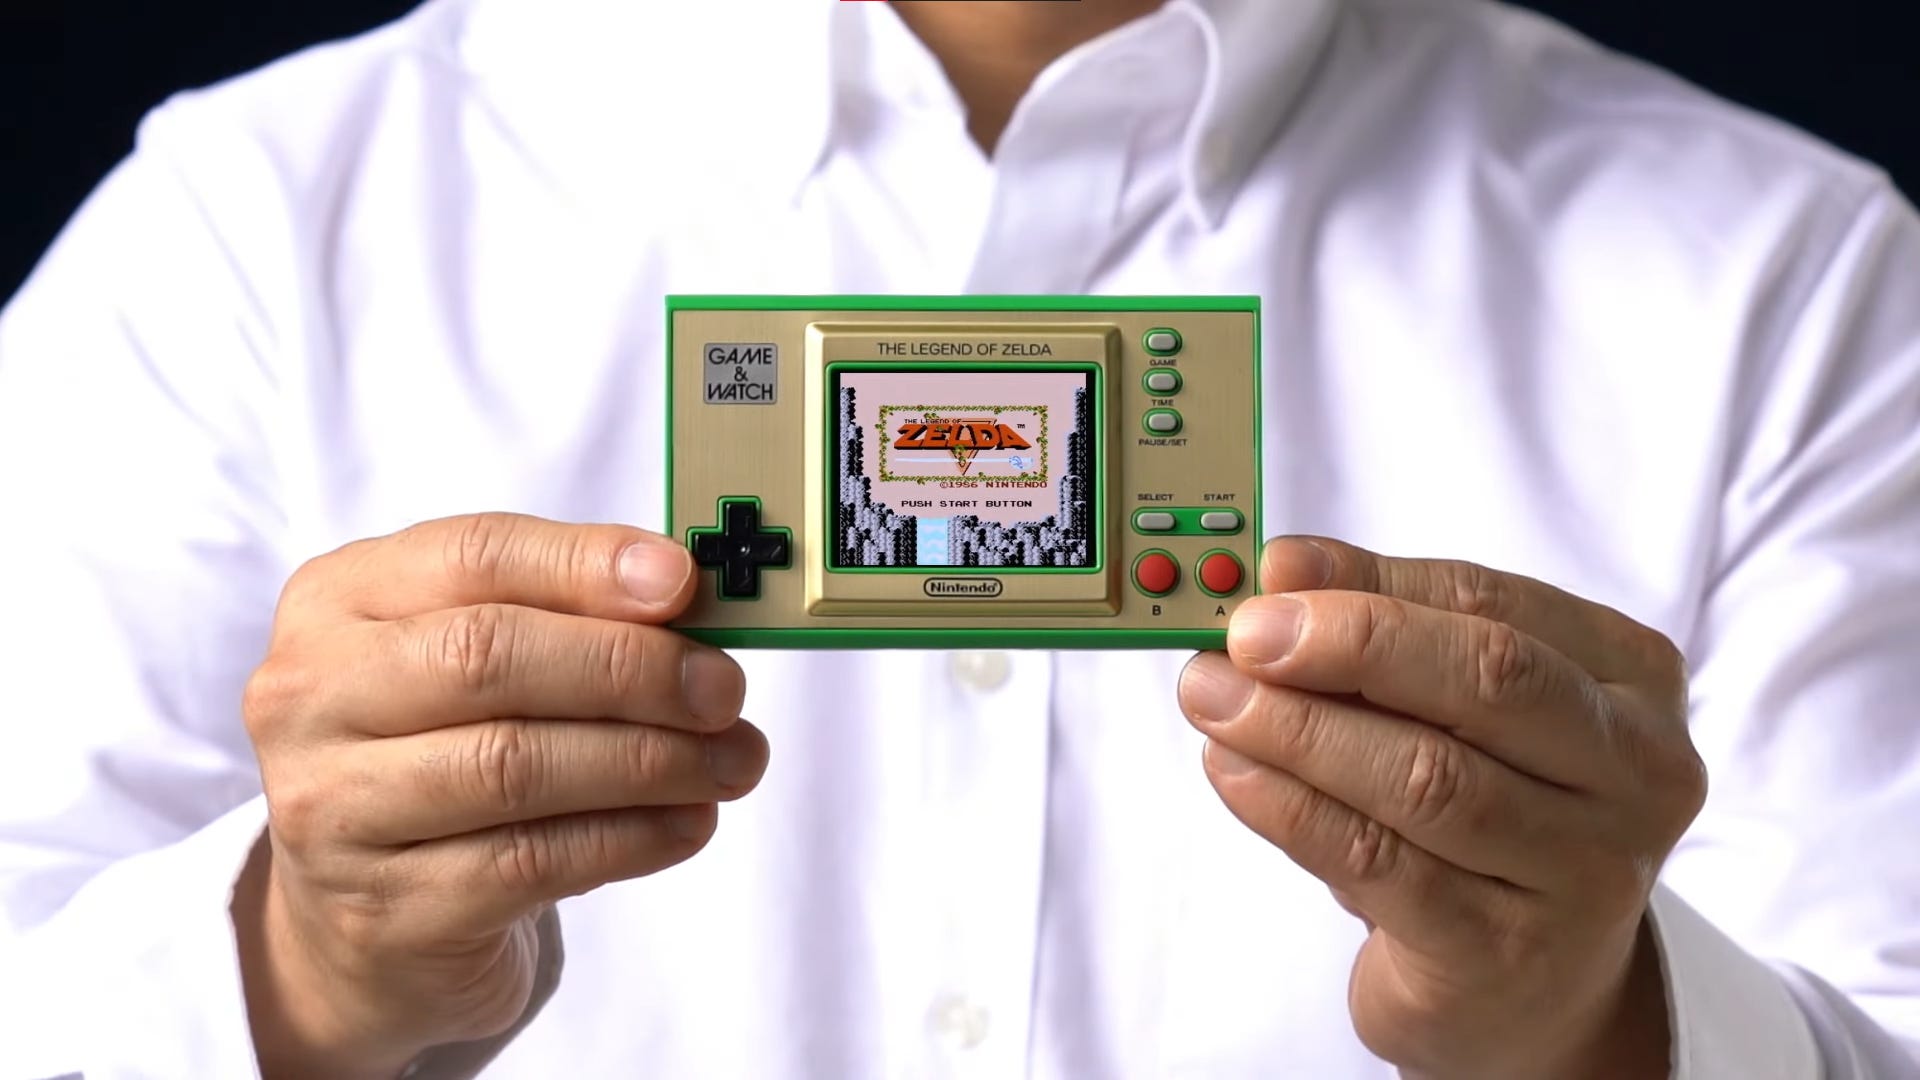 The Legend of Zelda: Game & Watch handheld game console (E3 2021)